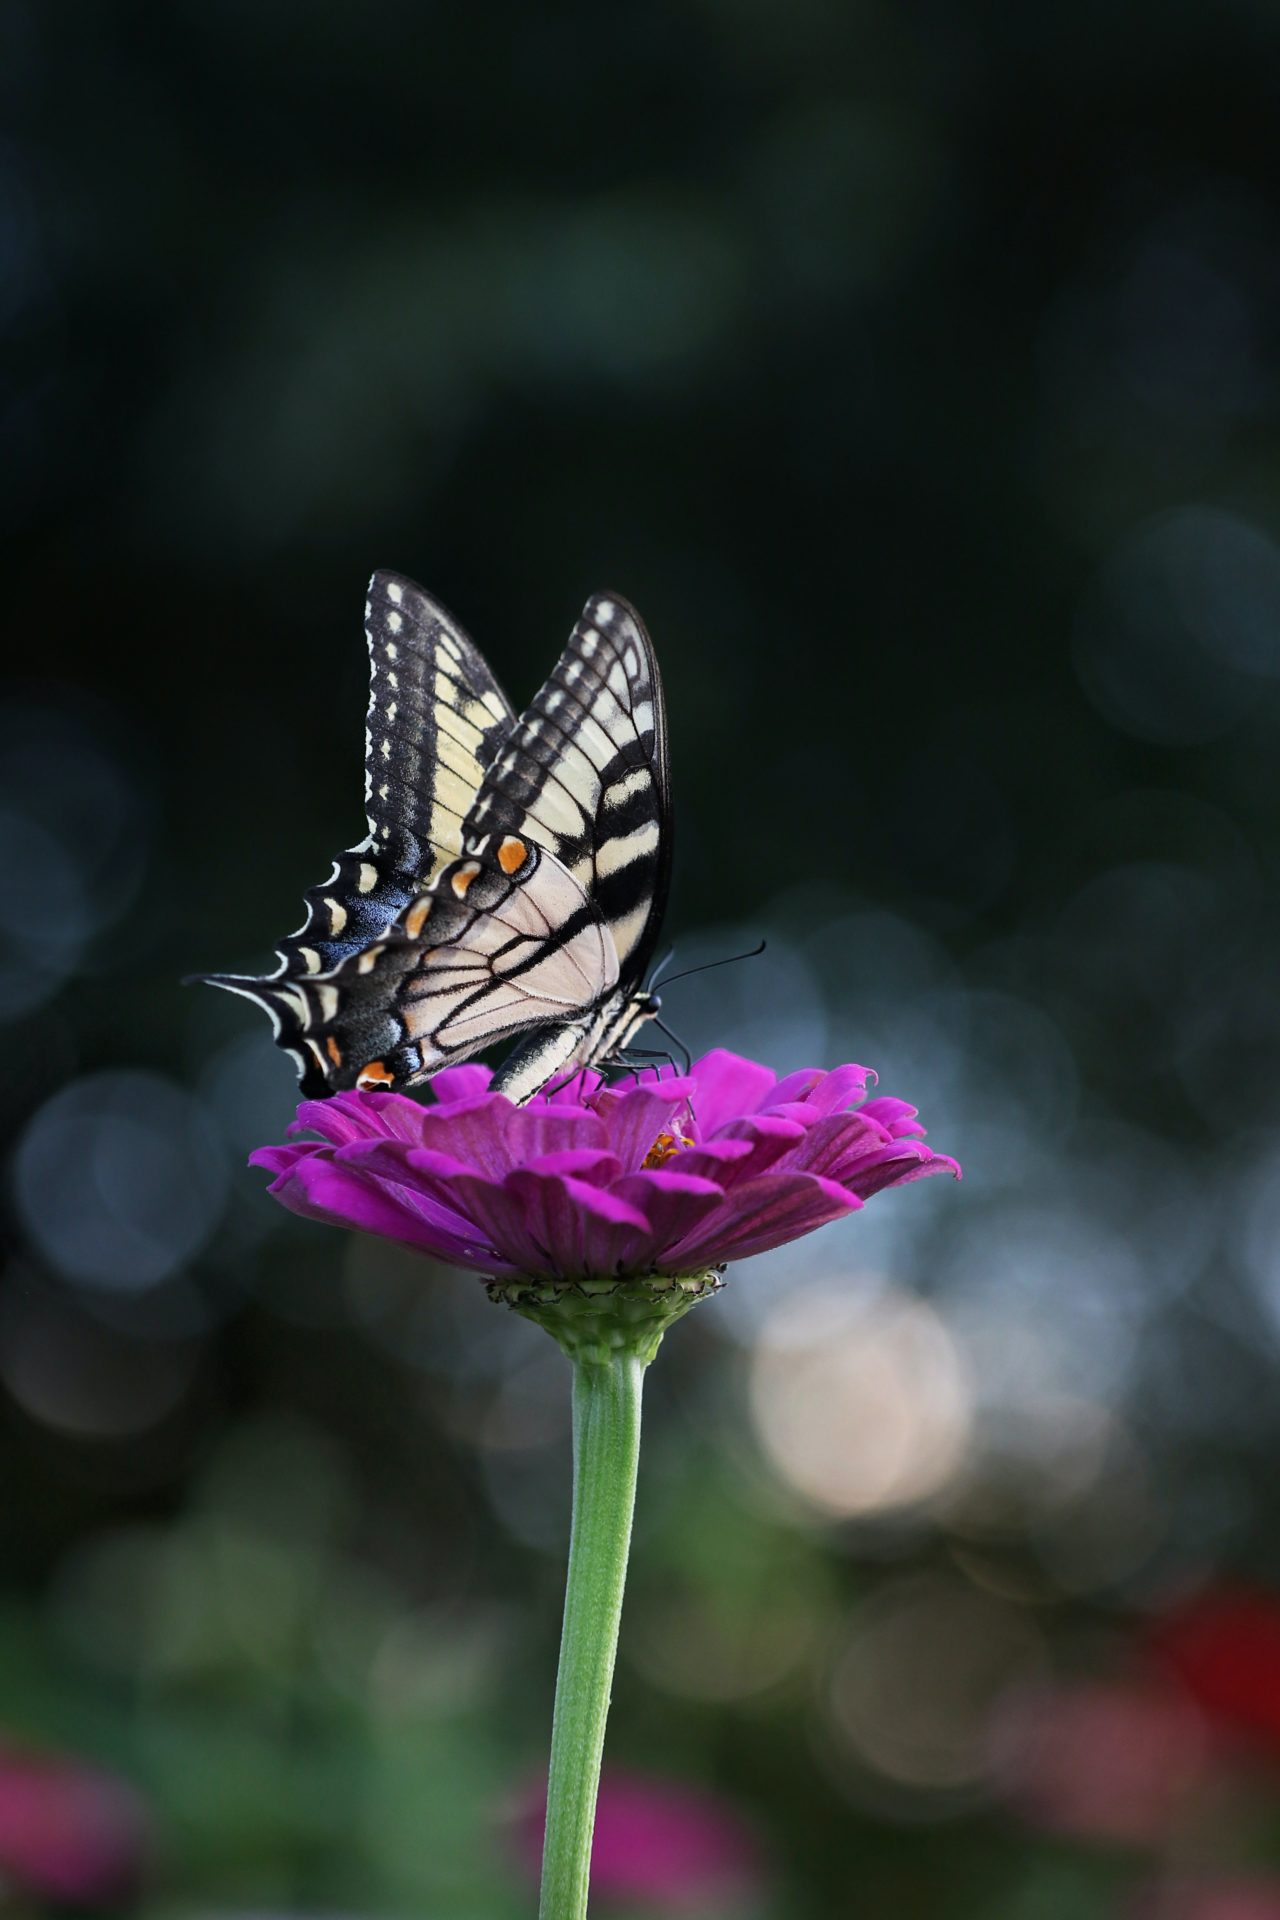 A butterfly resting on a zinnia